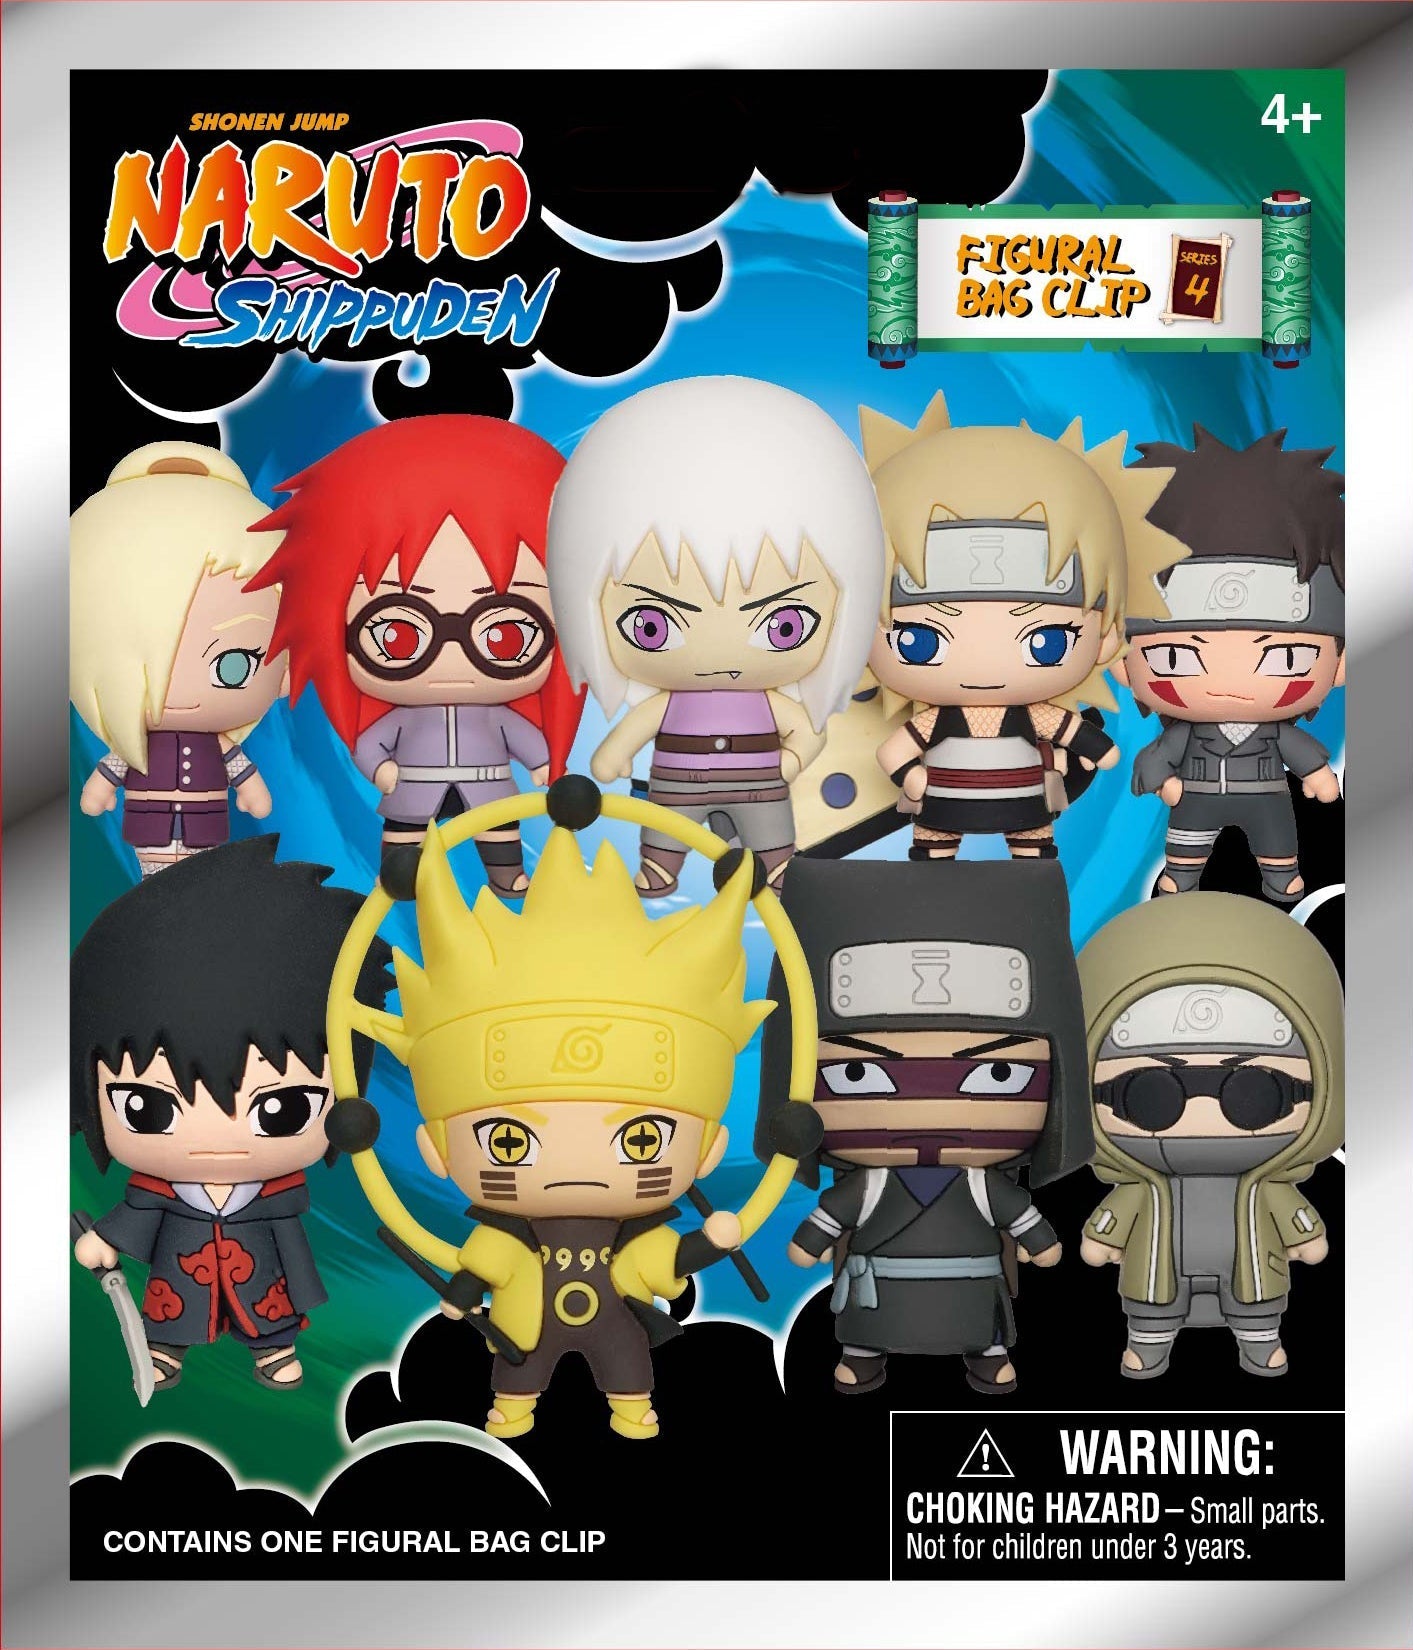 Naruto - Series 4 Foam Blind Bag Clips image count 2